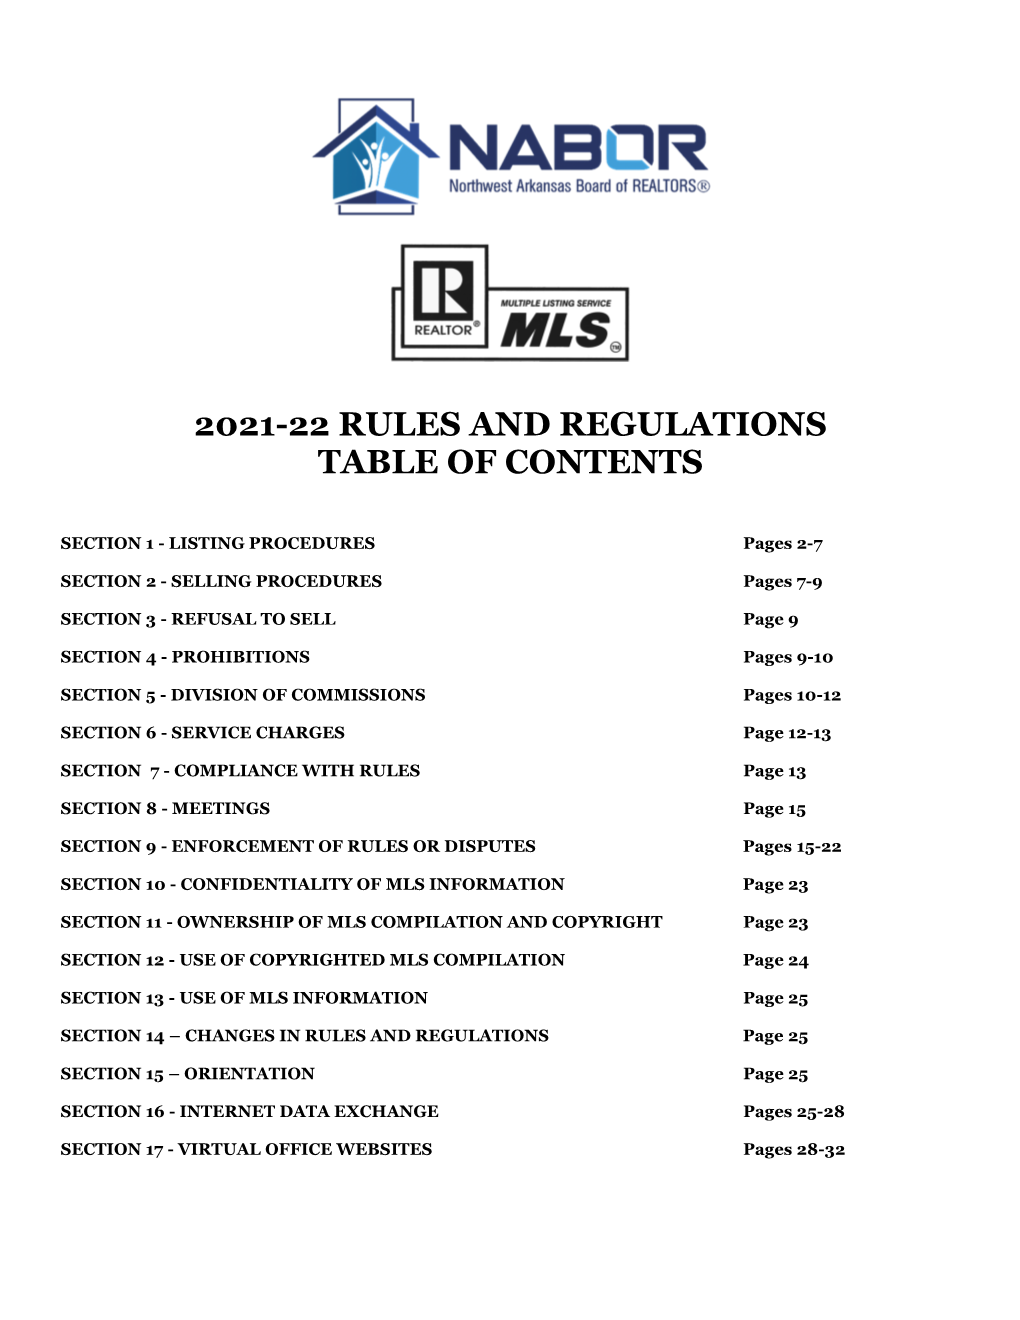 2020-21 Rules and Regulations Table of Contents